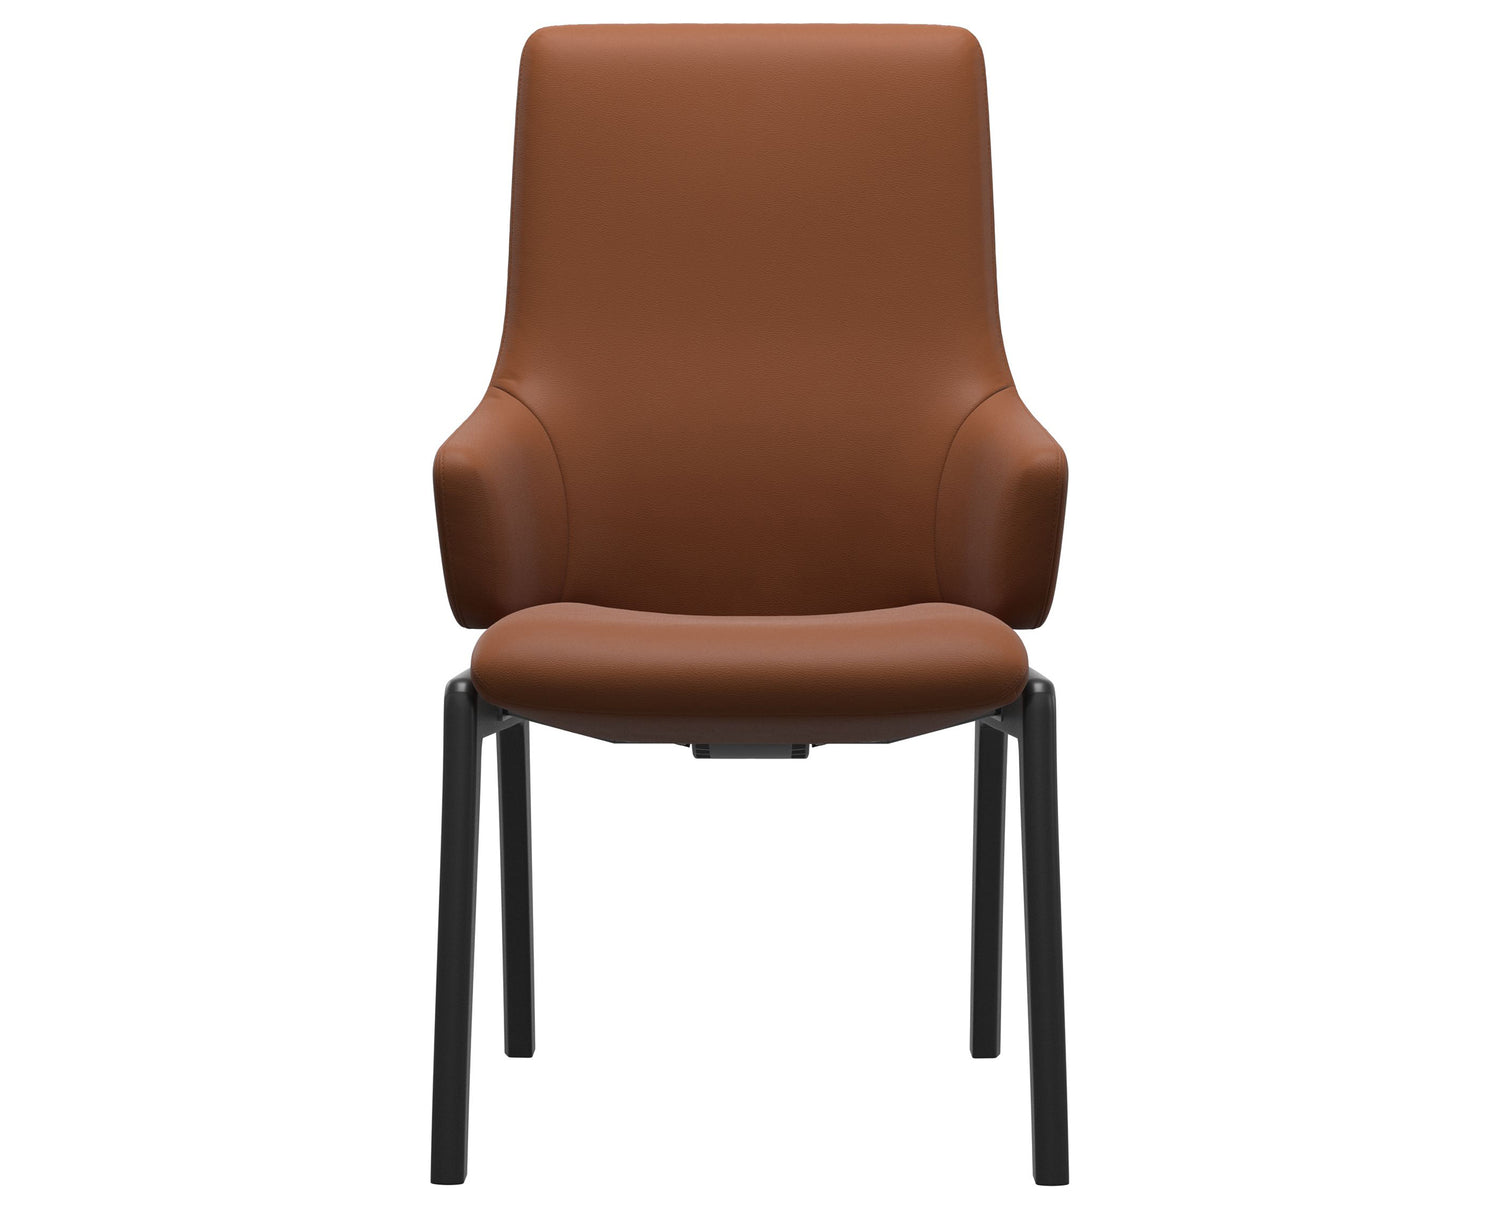 Paloma Leather New Cognac & Black Base | Stressless Laurel High Back D100 Dining Chair w/Arms | Valley Ridge Furniture